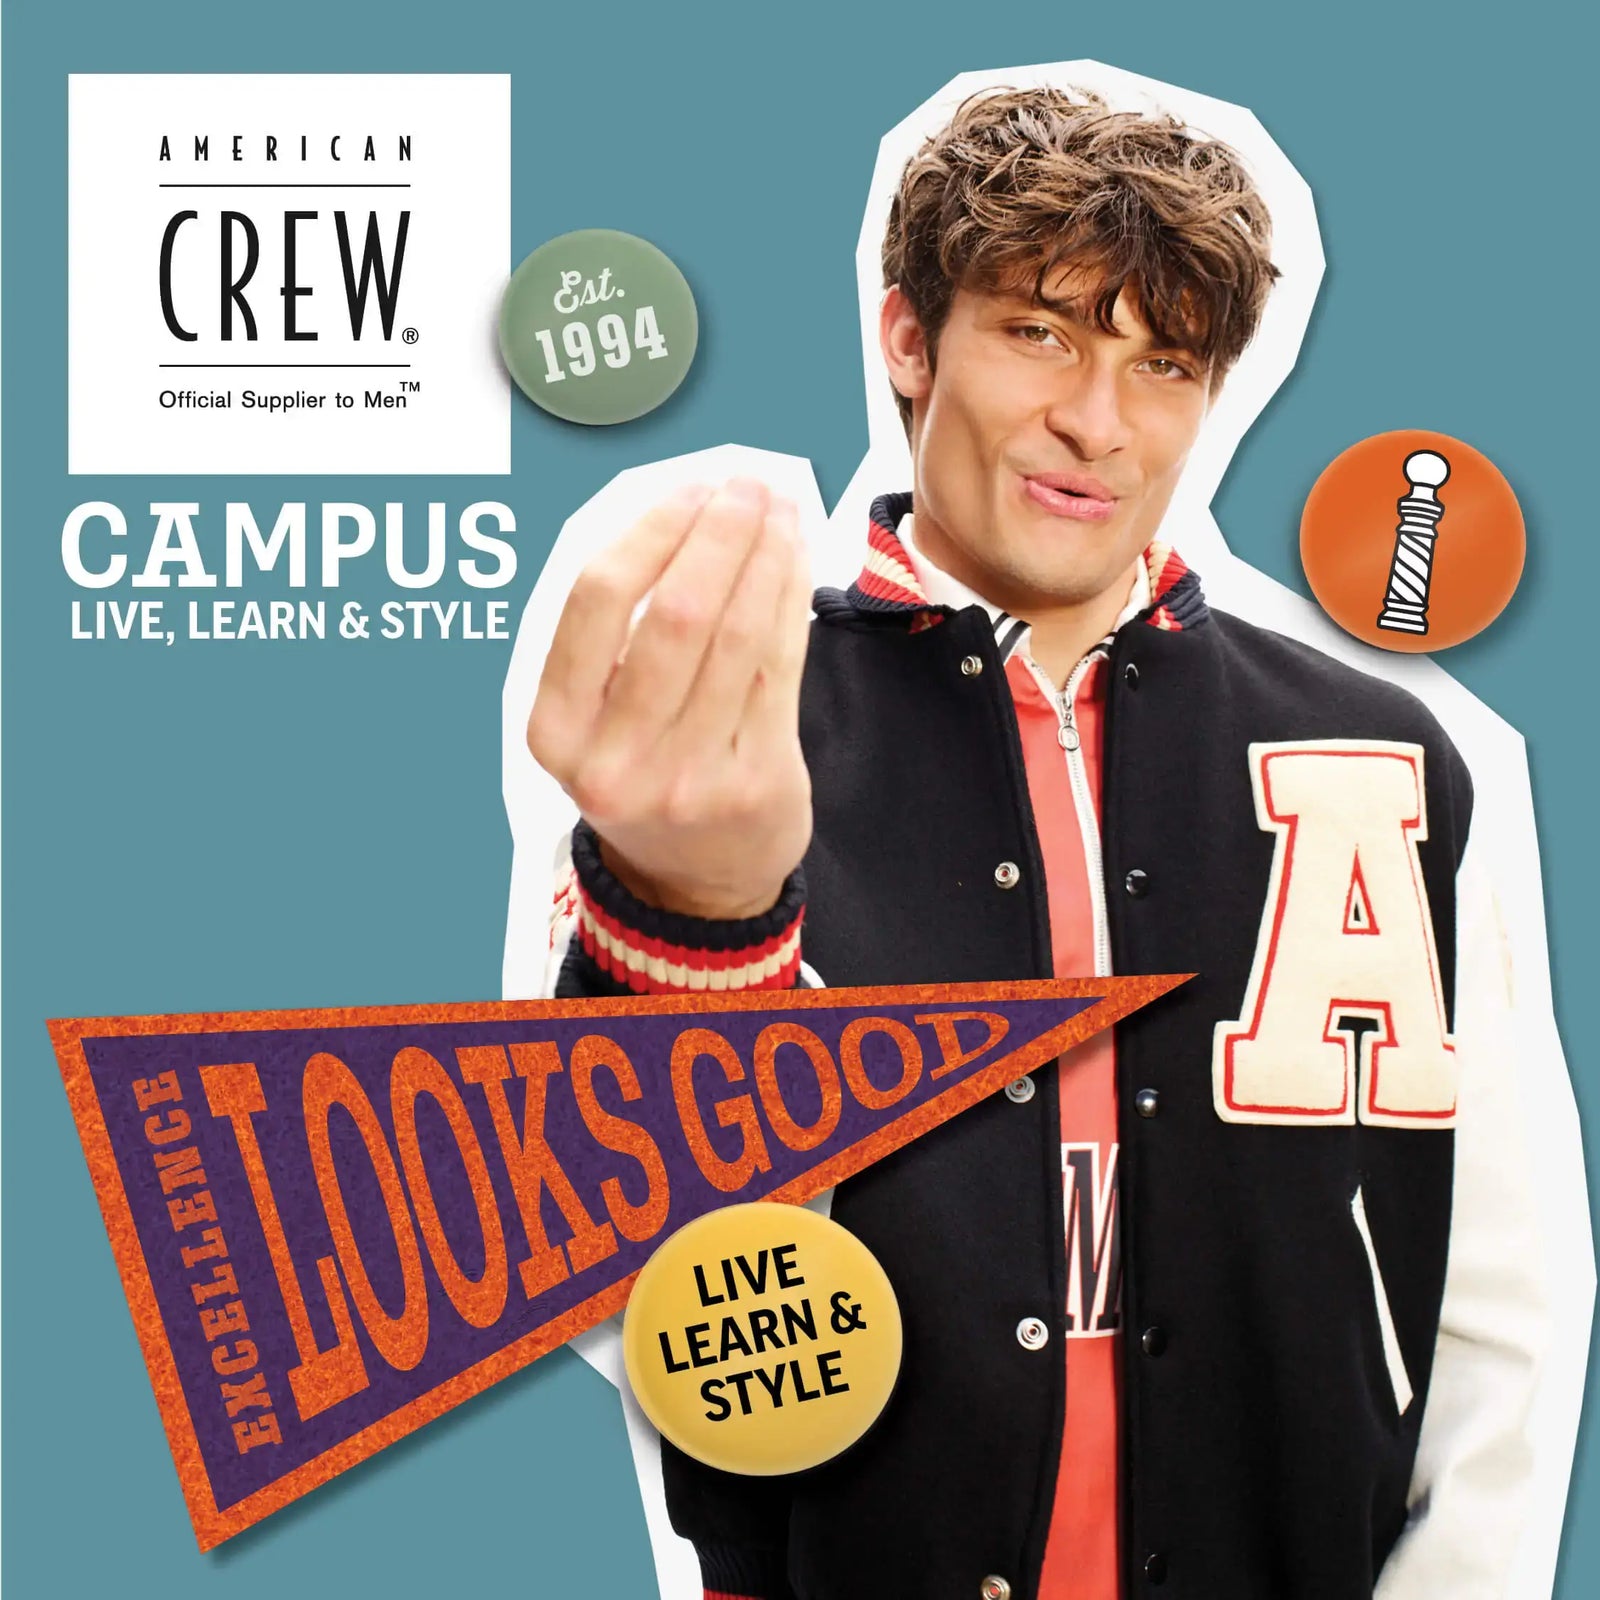 American Crew Campus Live, Learn & Style 